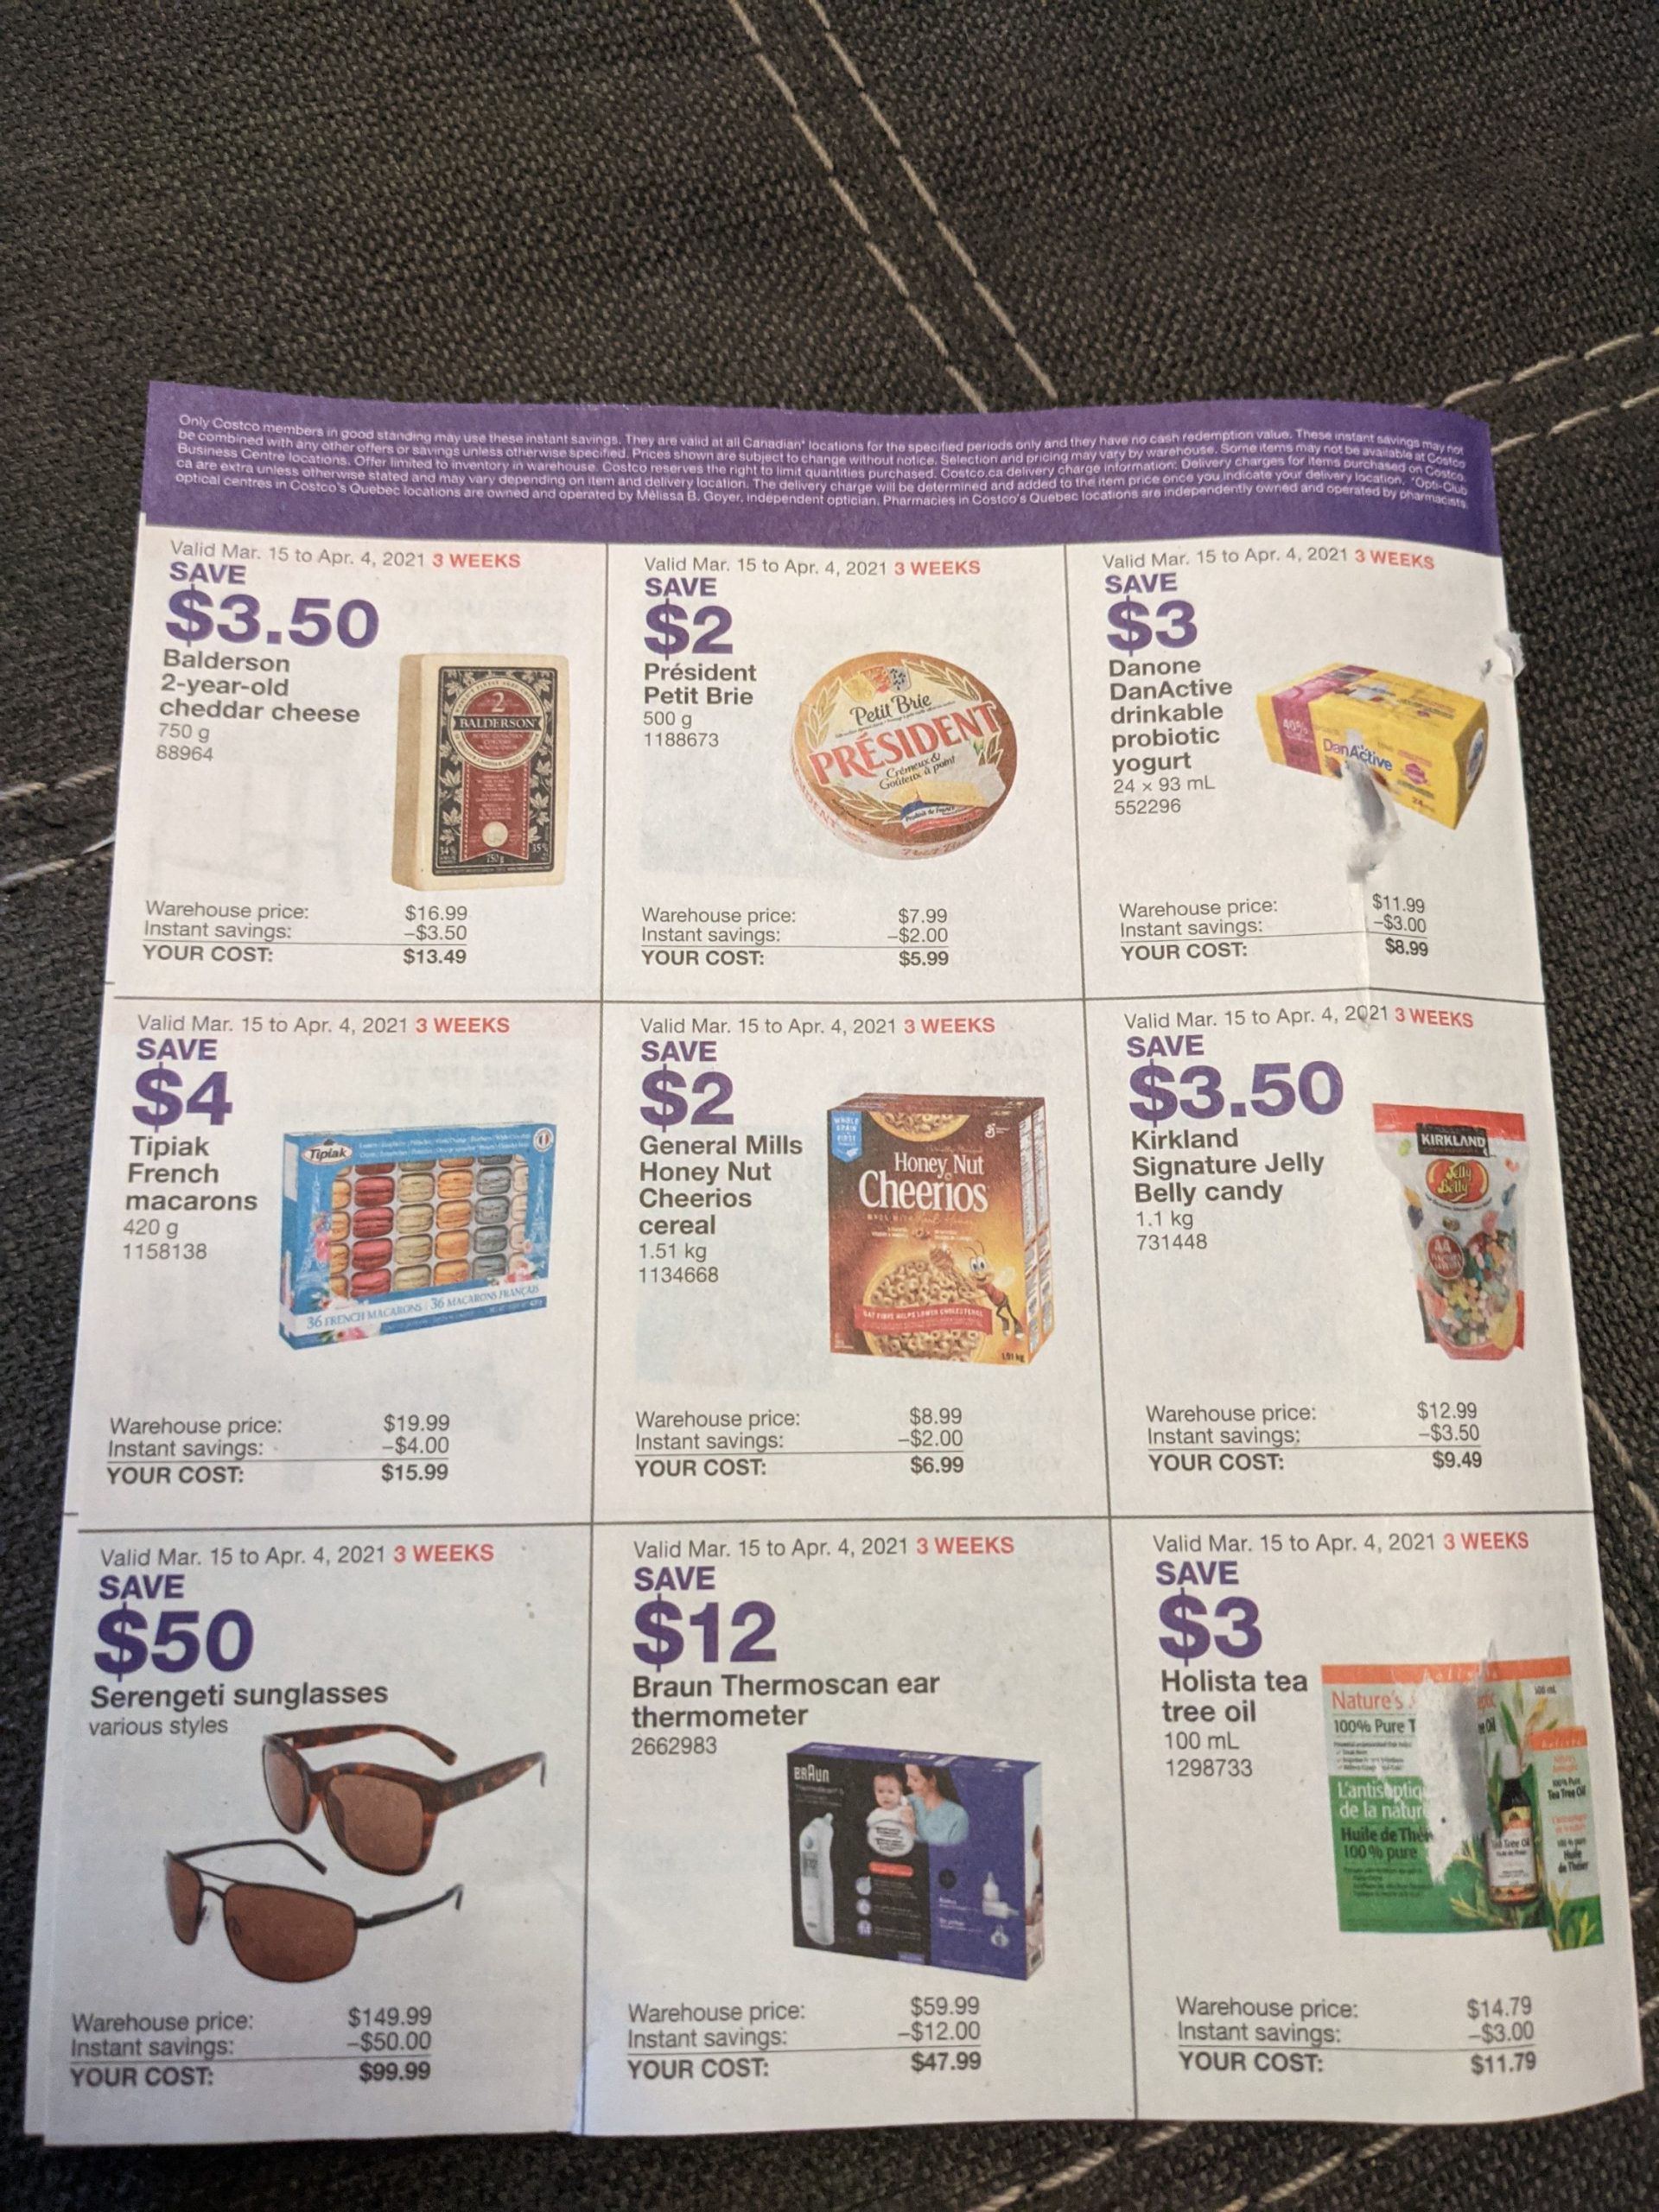 Sneak peek at Costco sales for March diapers, formula and more